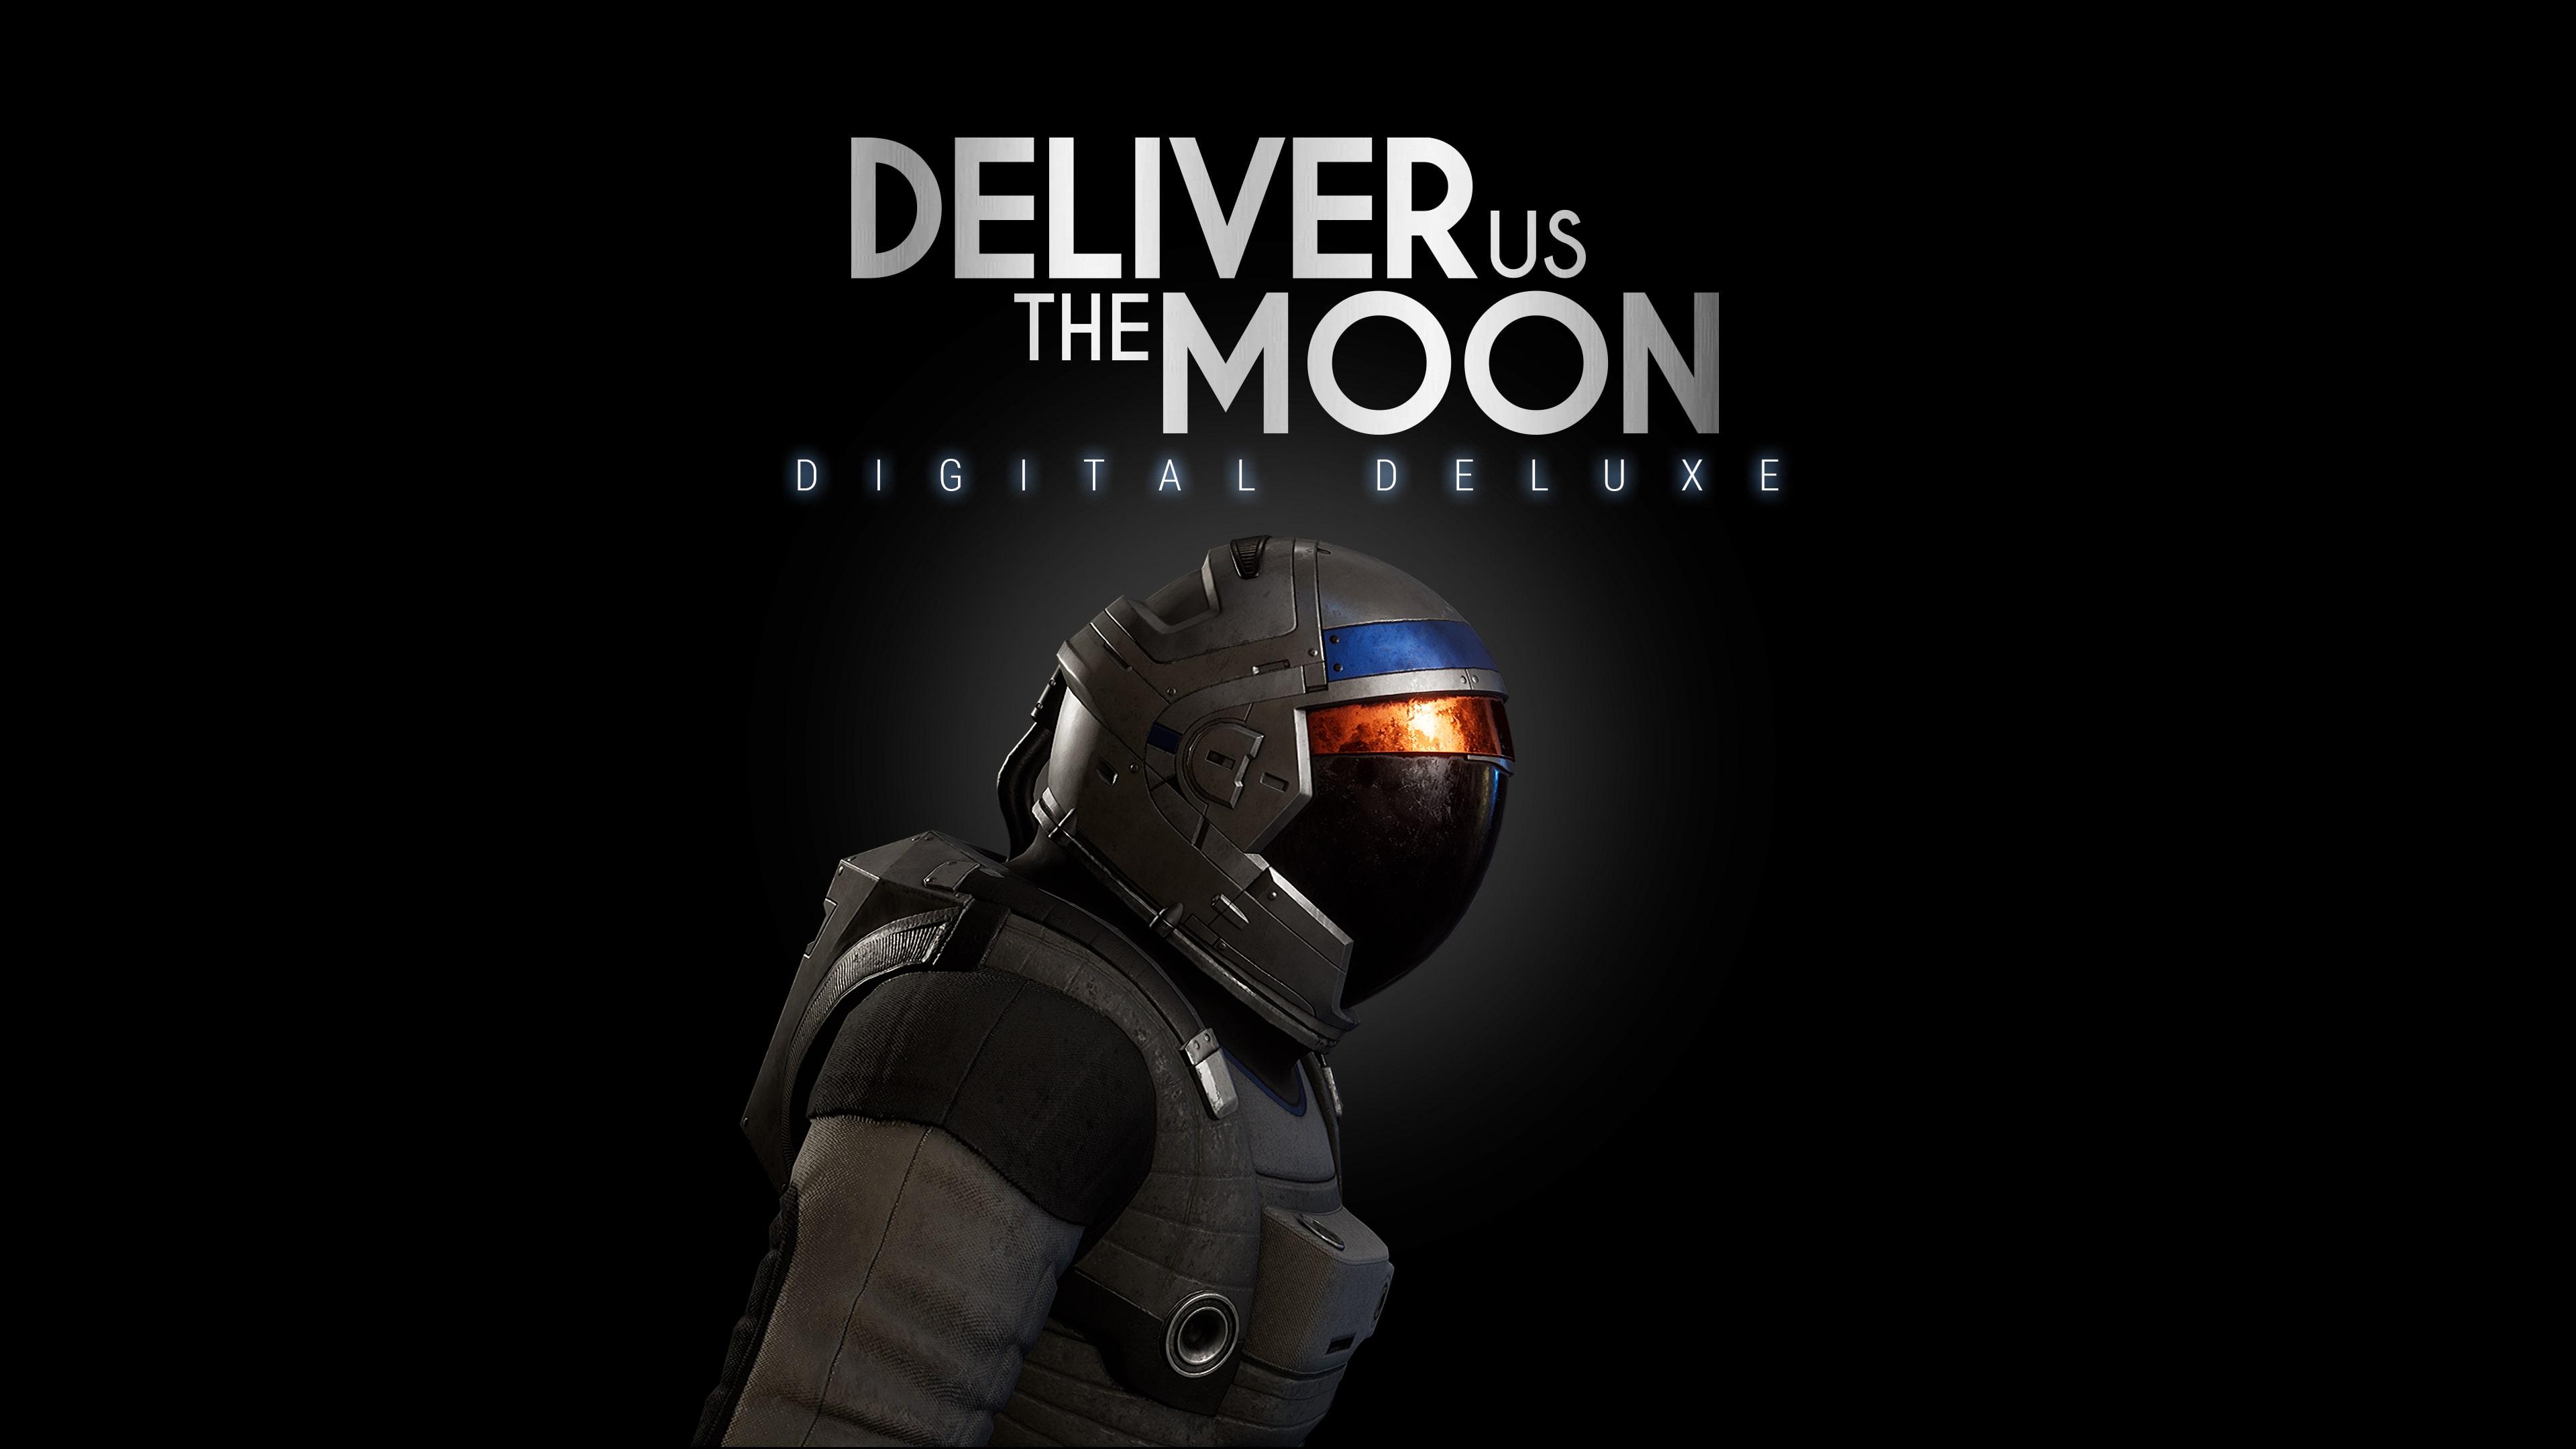 Deliver Us The Moon Digital Deluxe